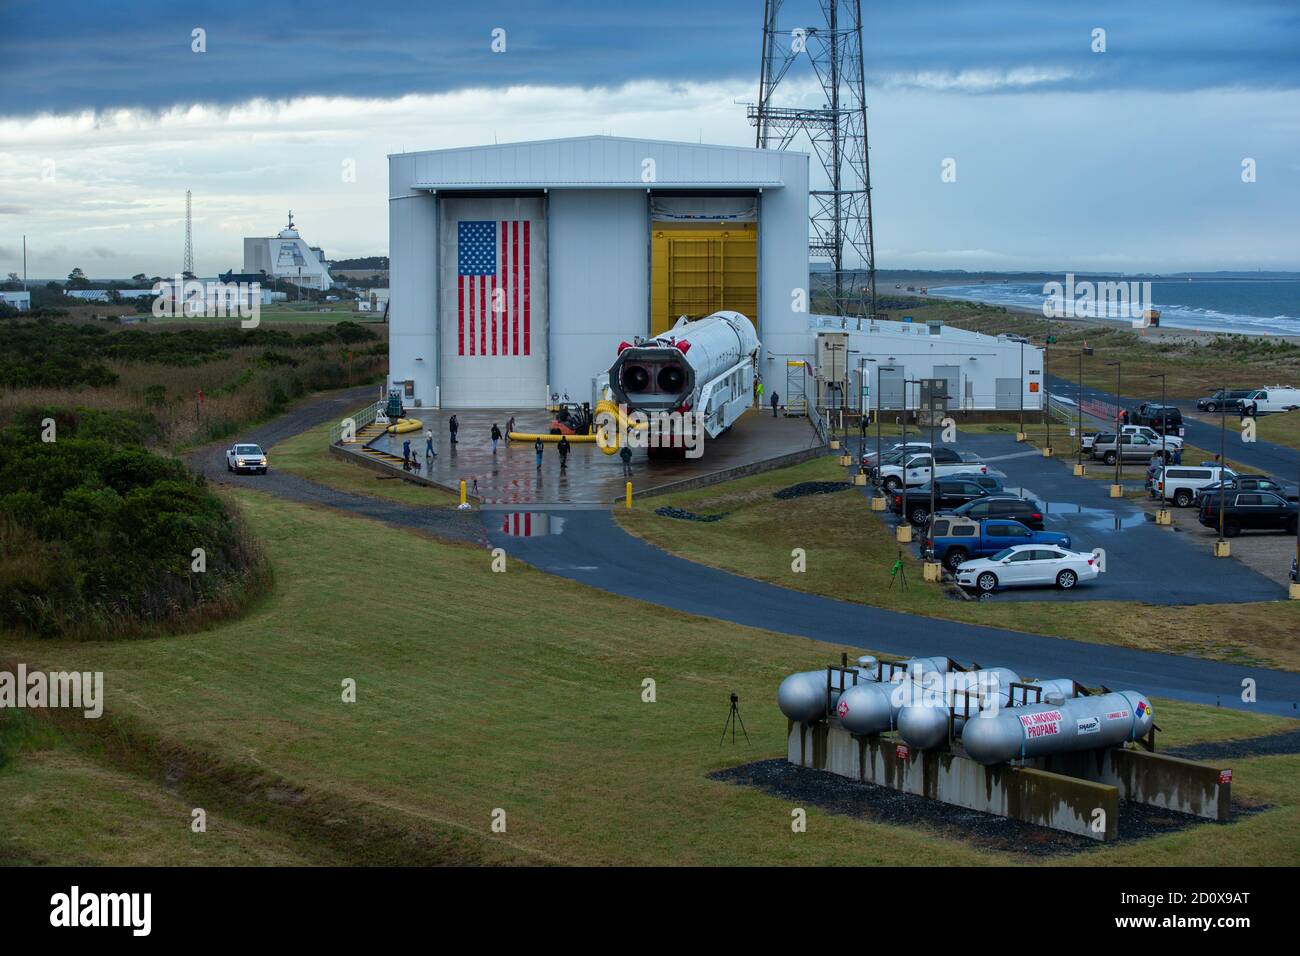 The Northrop Grumman Antares rocket, with Cygnus resupply spacecraft onboard, is rolled out of the Horizontal Integration Facility on its way to the Mid-Atlantic Regional Spaceport Launch Pad-0A at the NASA Wallops Flight Facility September 26, 2020 in Wallops, Virginia. The commercial cargo resupply mission is carrying 8,000 pounds of supplies and equipment to the International Space Station. Stock Photo